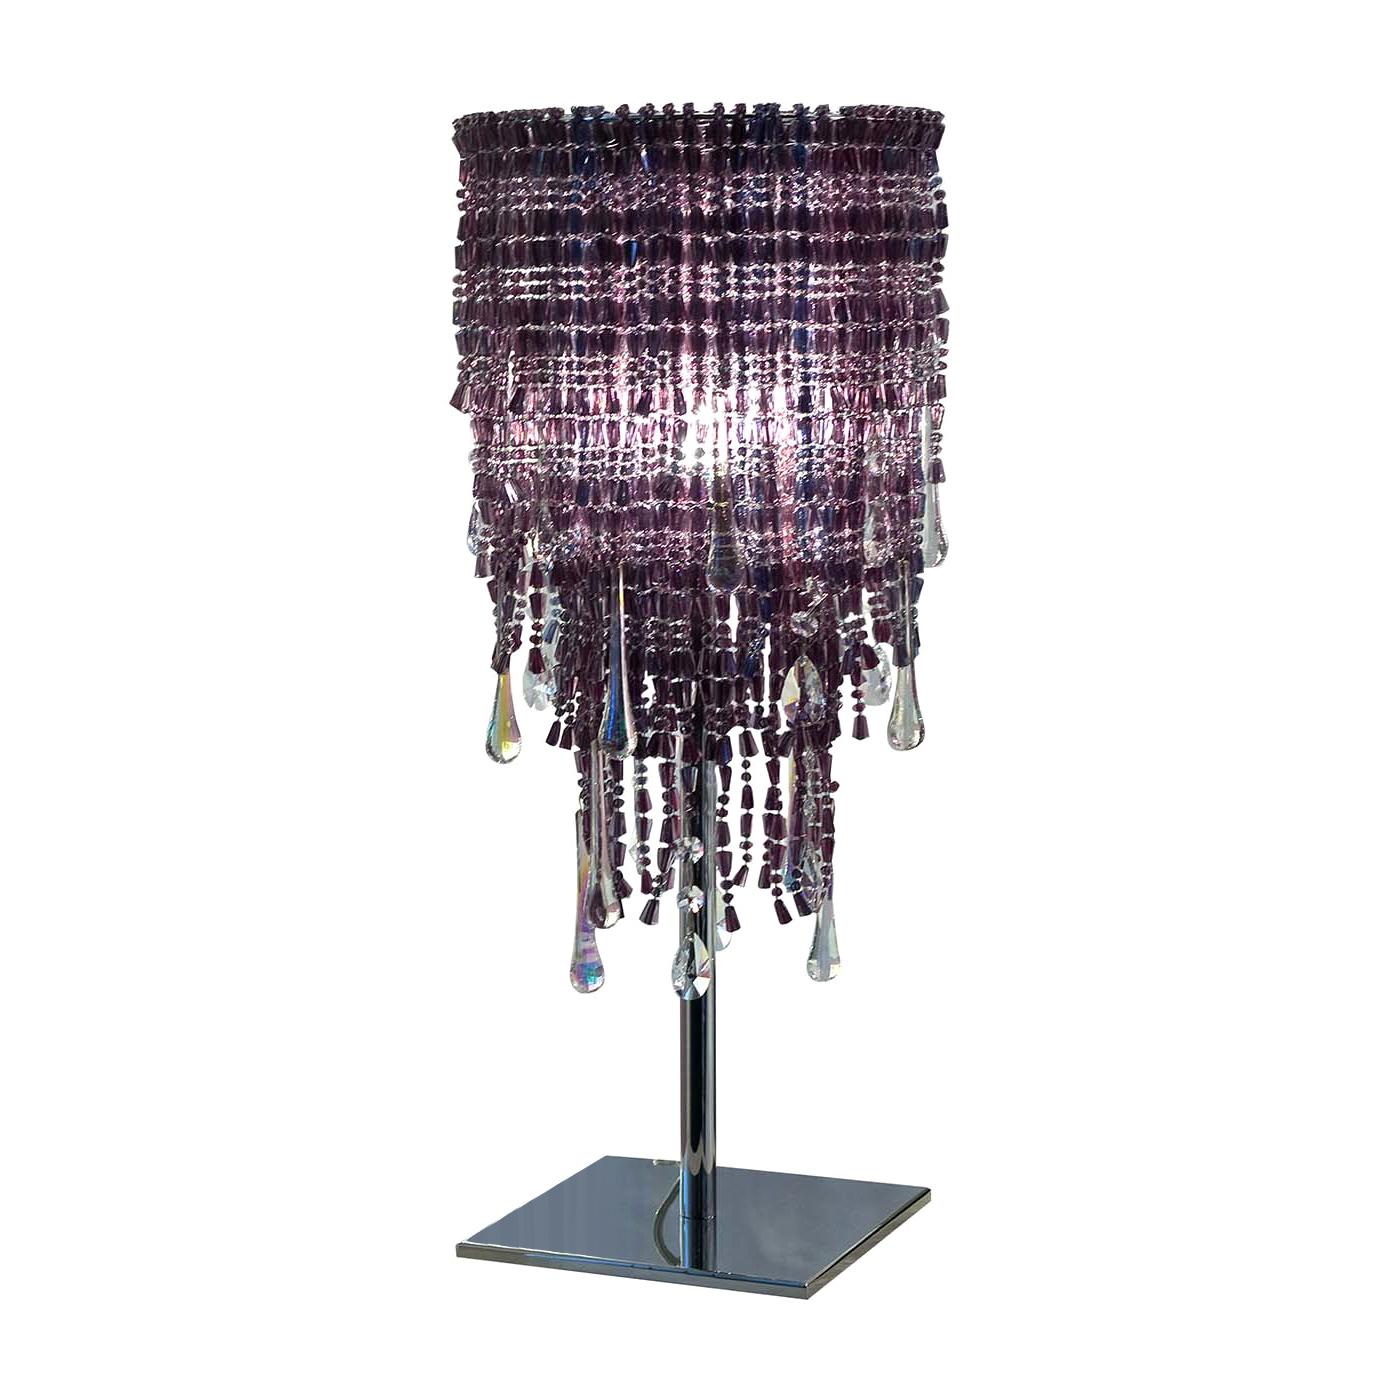 Perle Cascata Table Lamp in Lilac